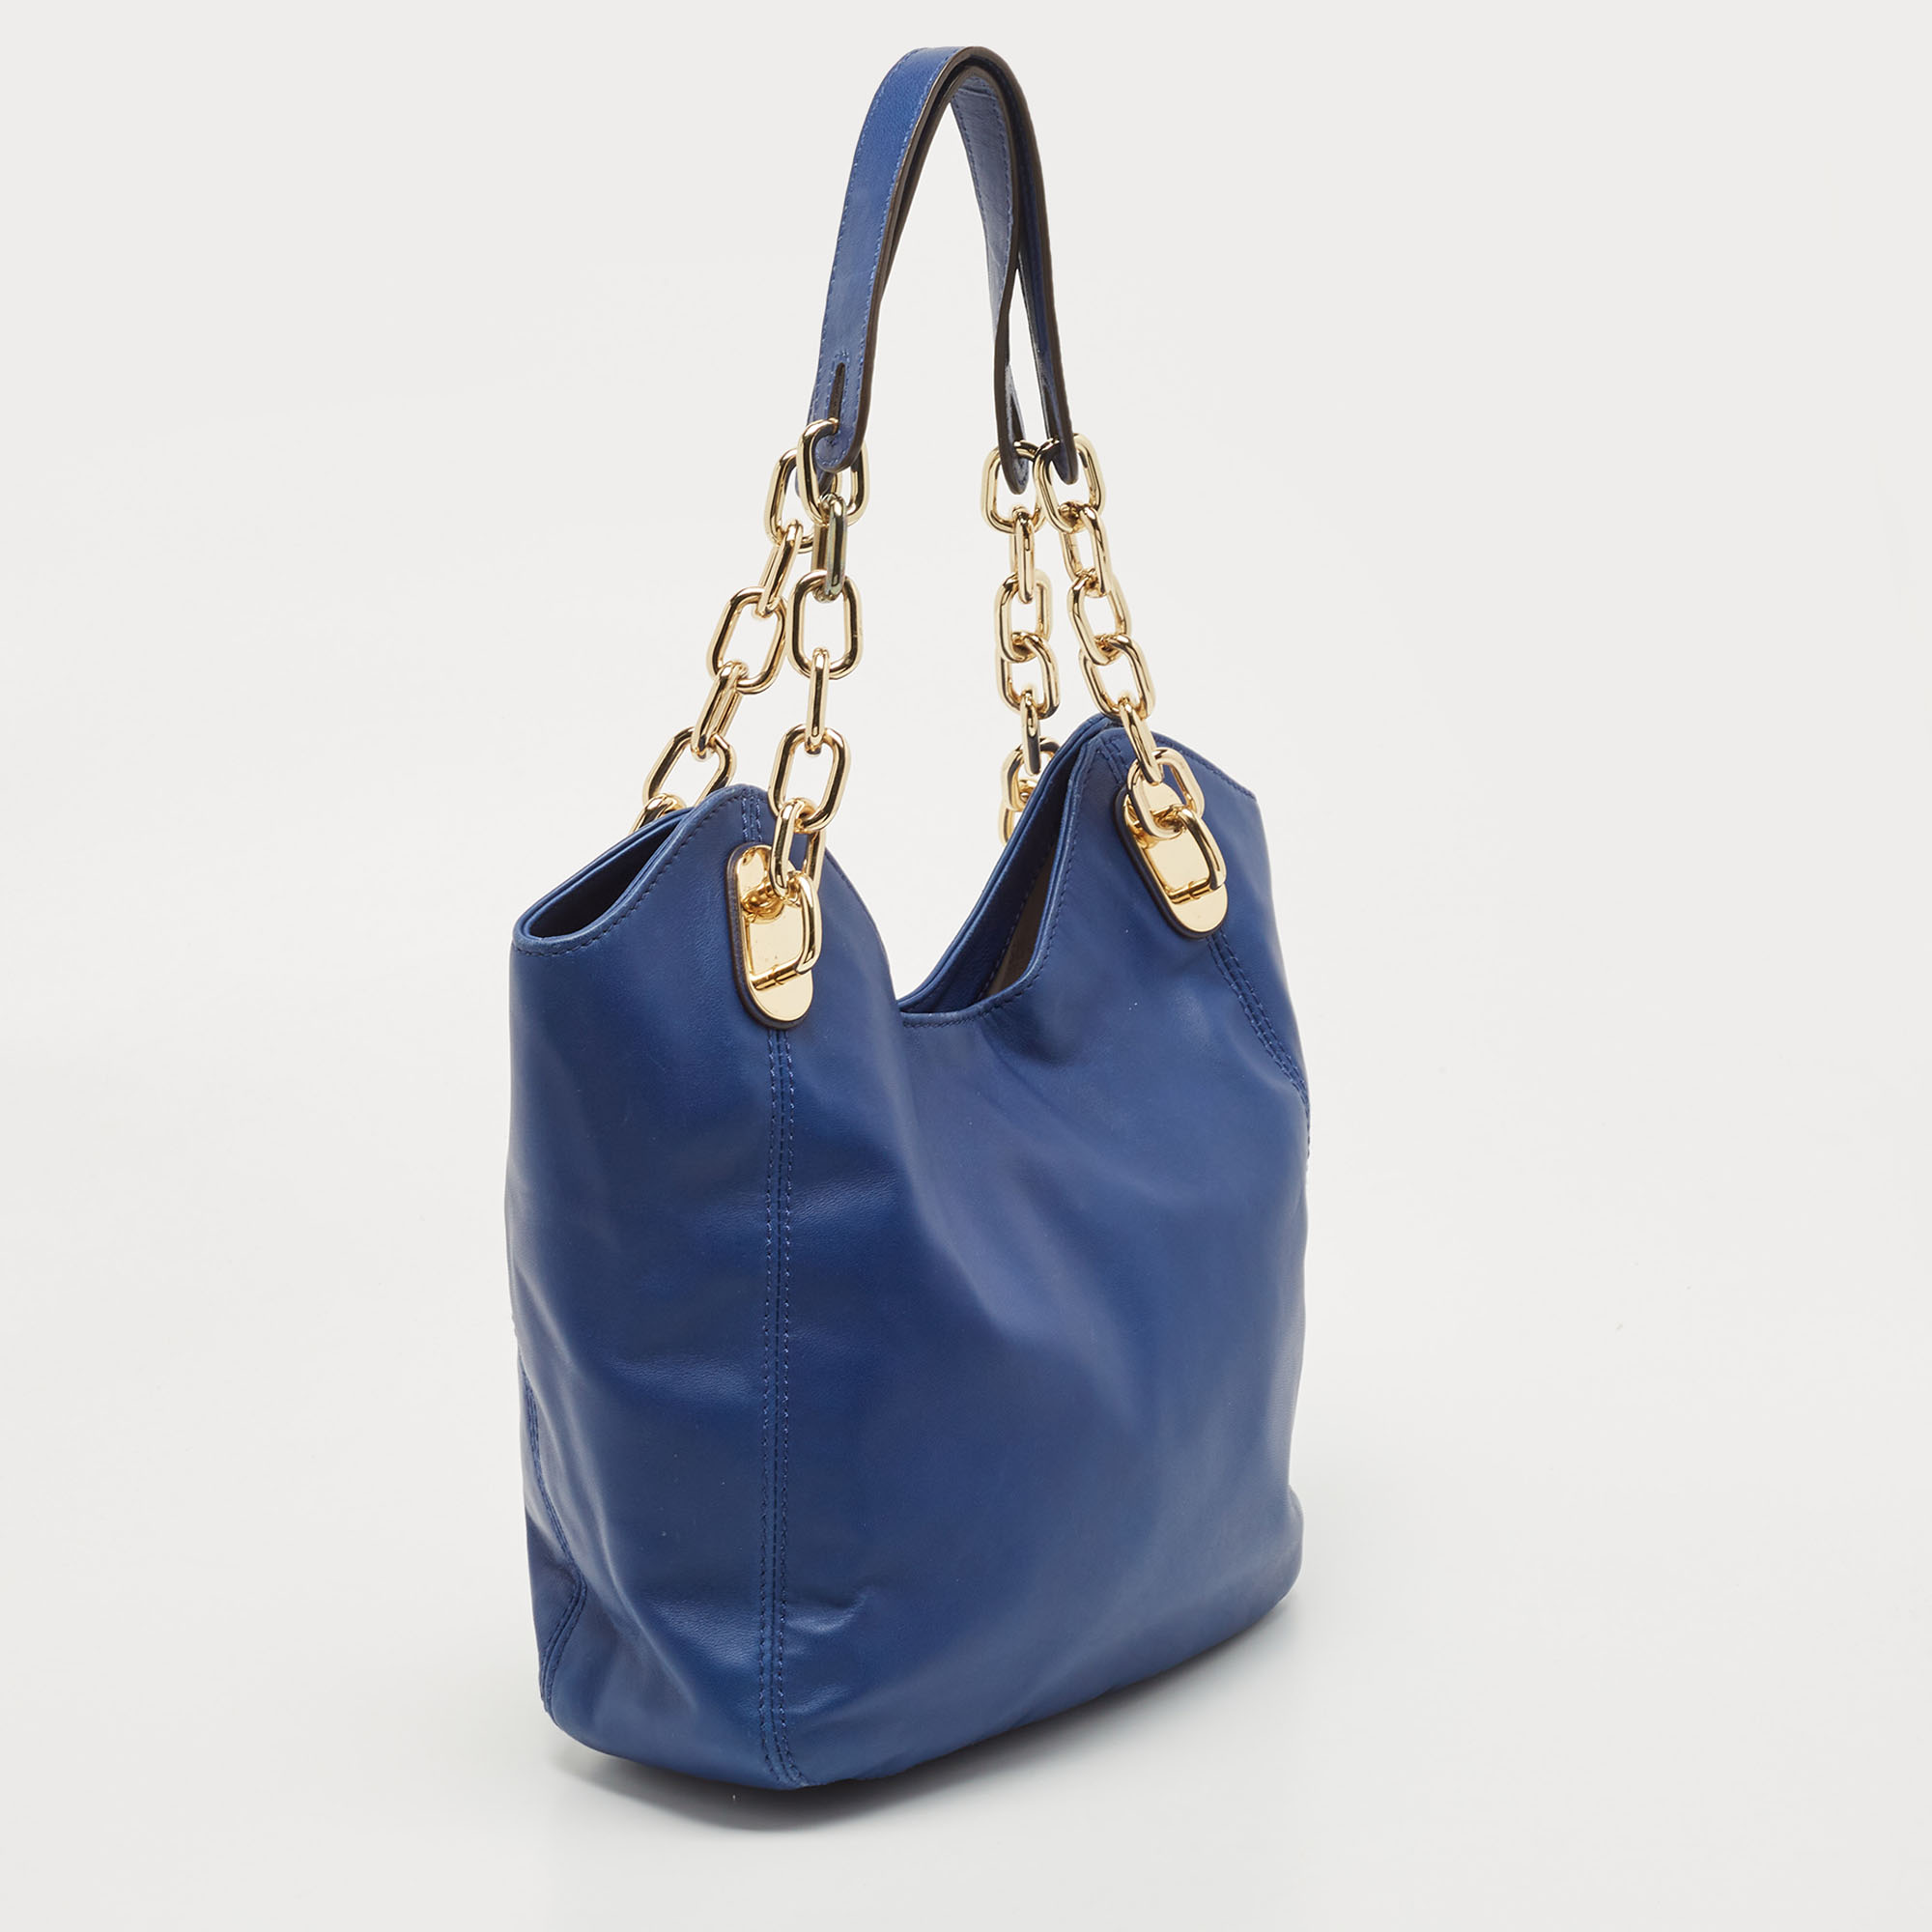 MICHAEL Michael Kors Blue Leather Lilly Tote